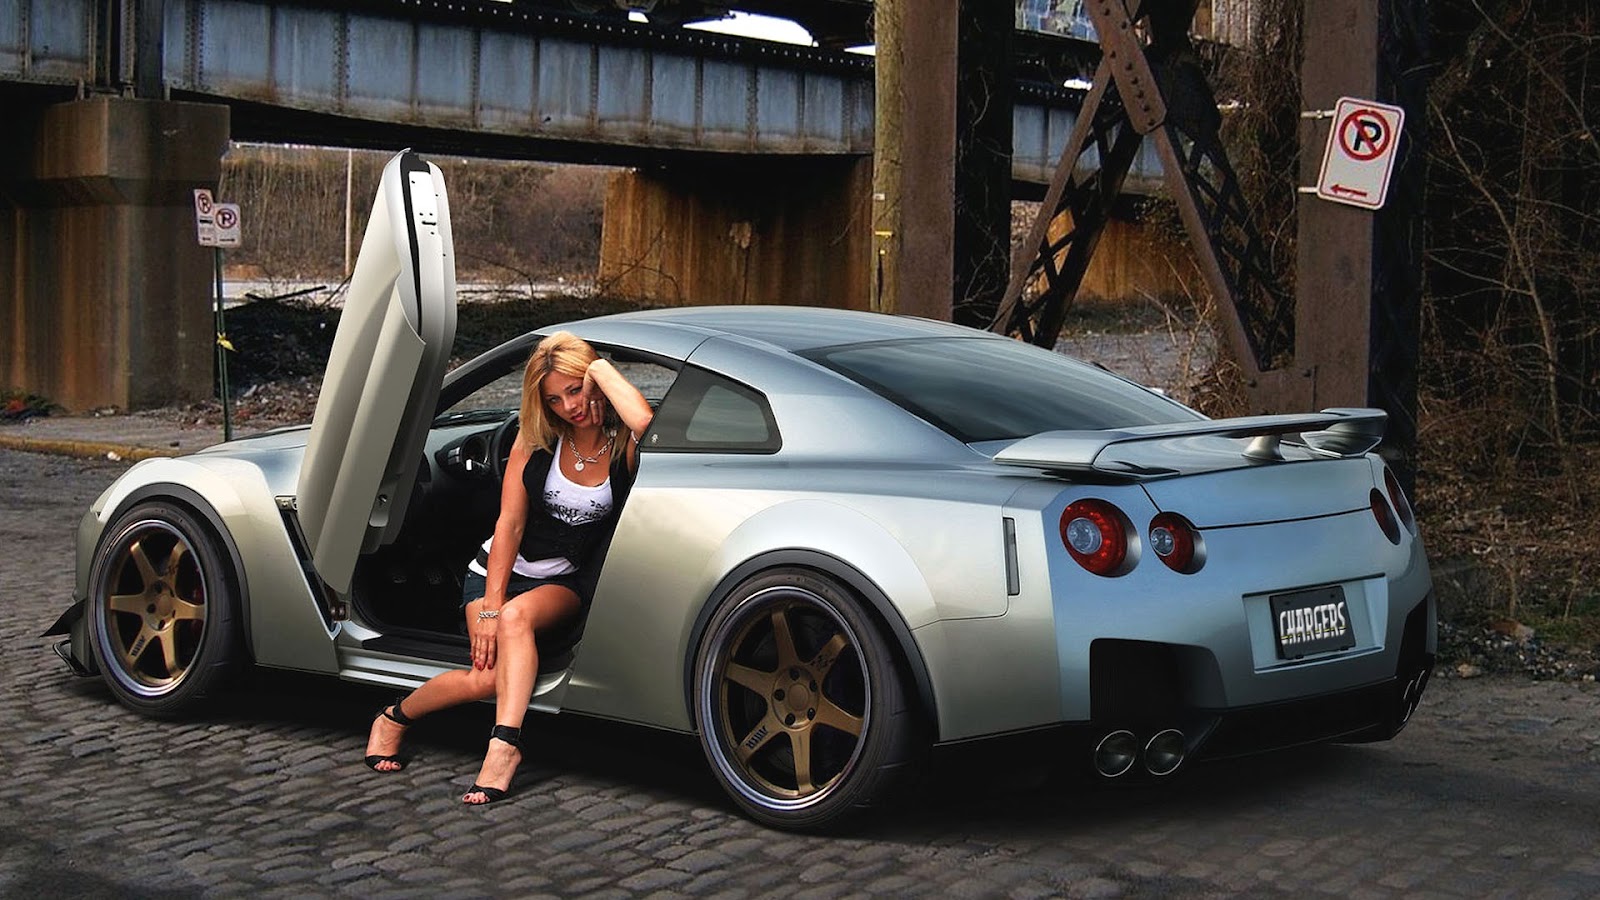 Sexy Cars And Girls Wallpaper And Pictures - Car Wallpaper 4k Jdm -  1600x900 Wallpaper 